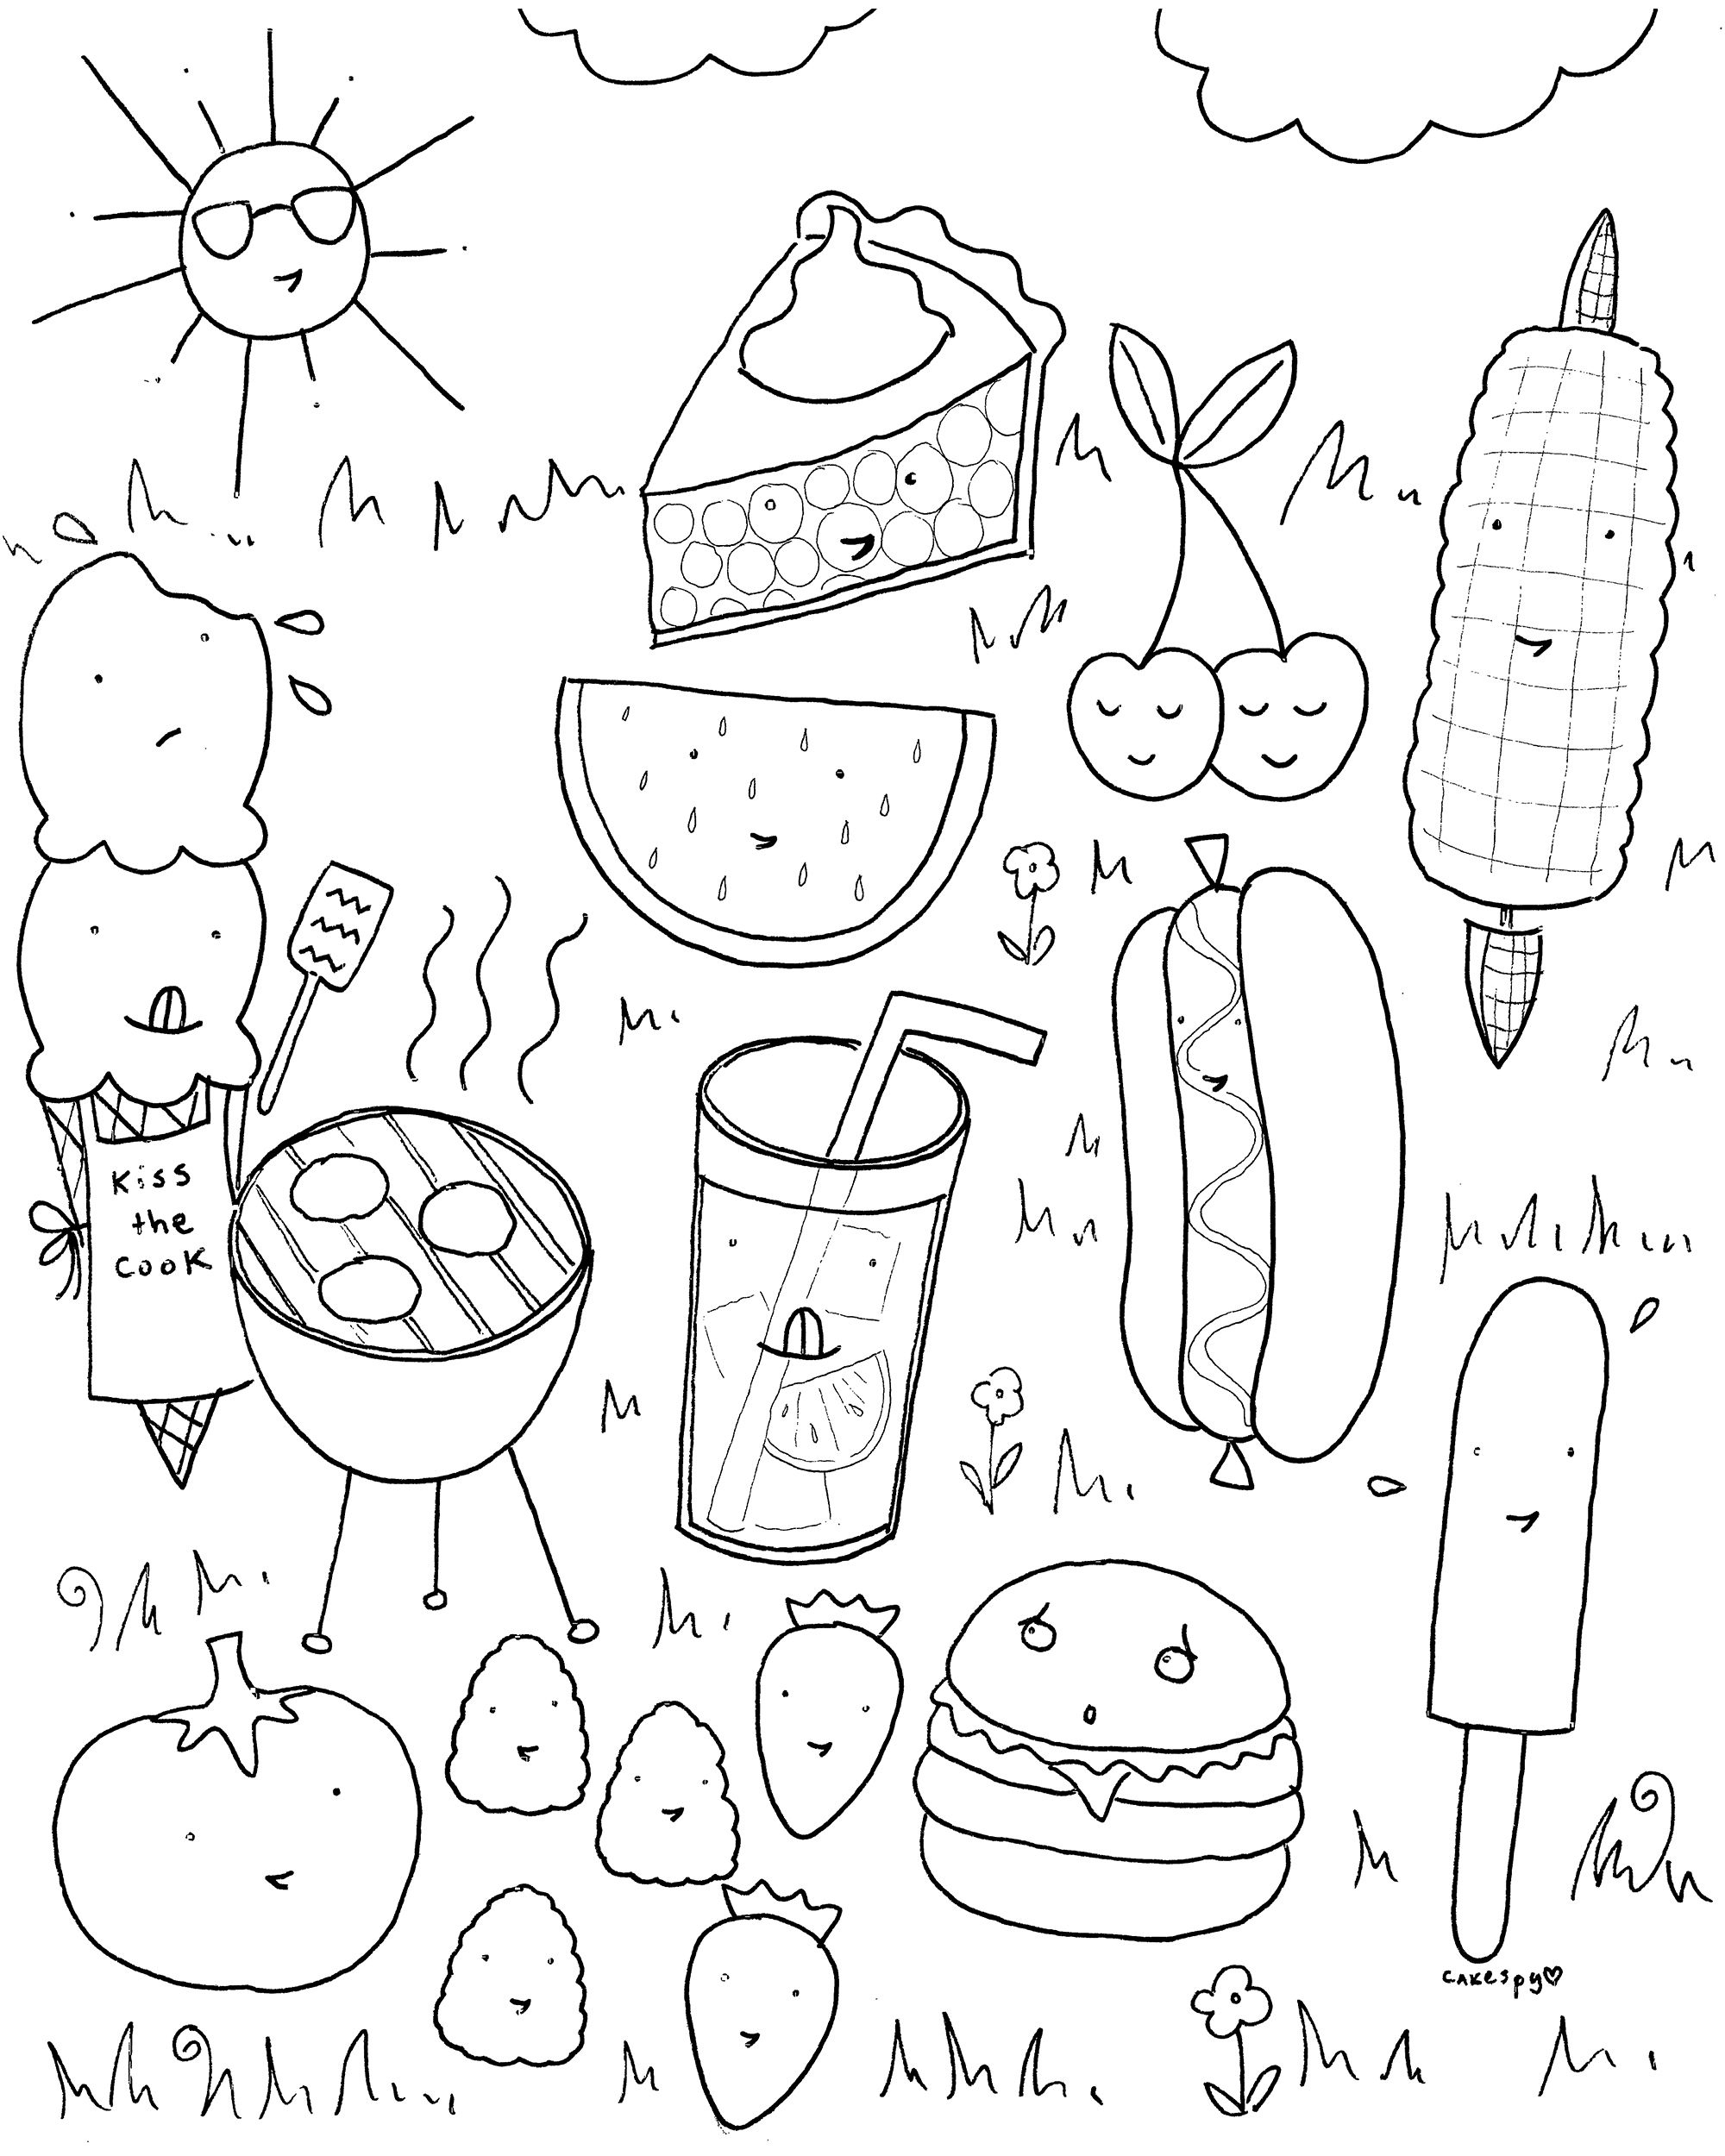 Free Downloadable Summer Fun Coloring Book Pages | Ideen Für Kinder - Summer Coloring Sheets Free Printable